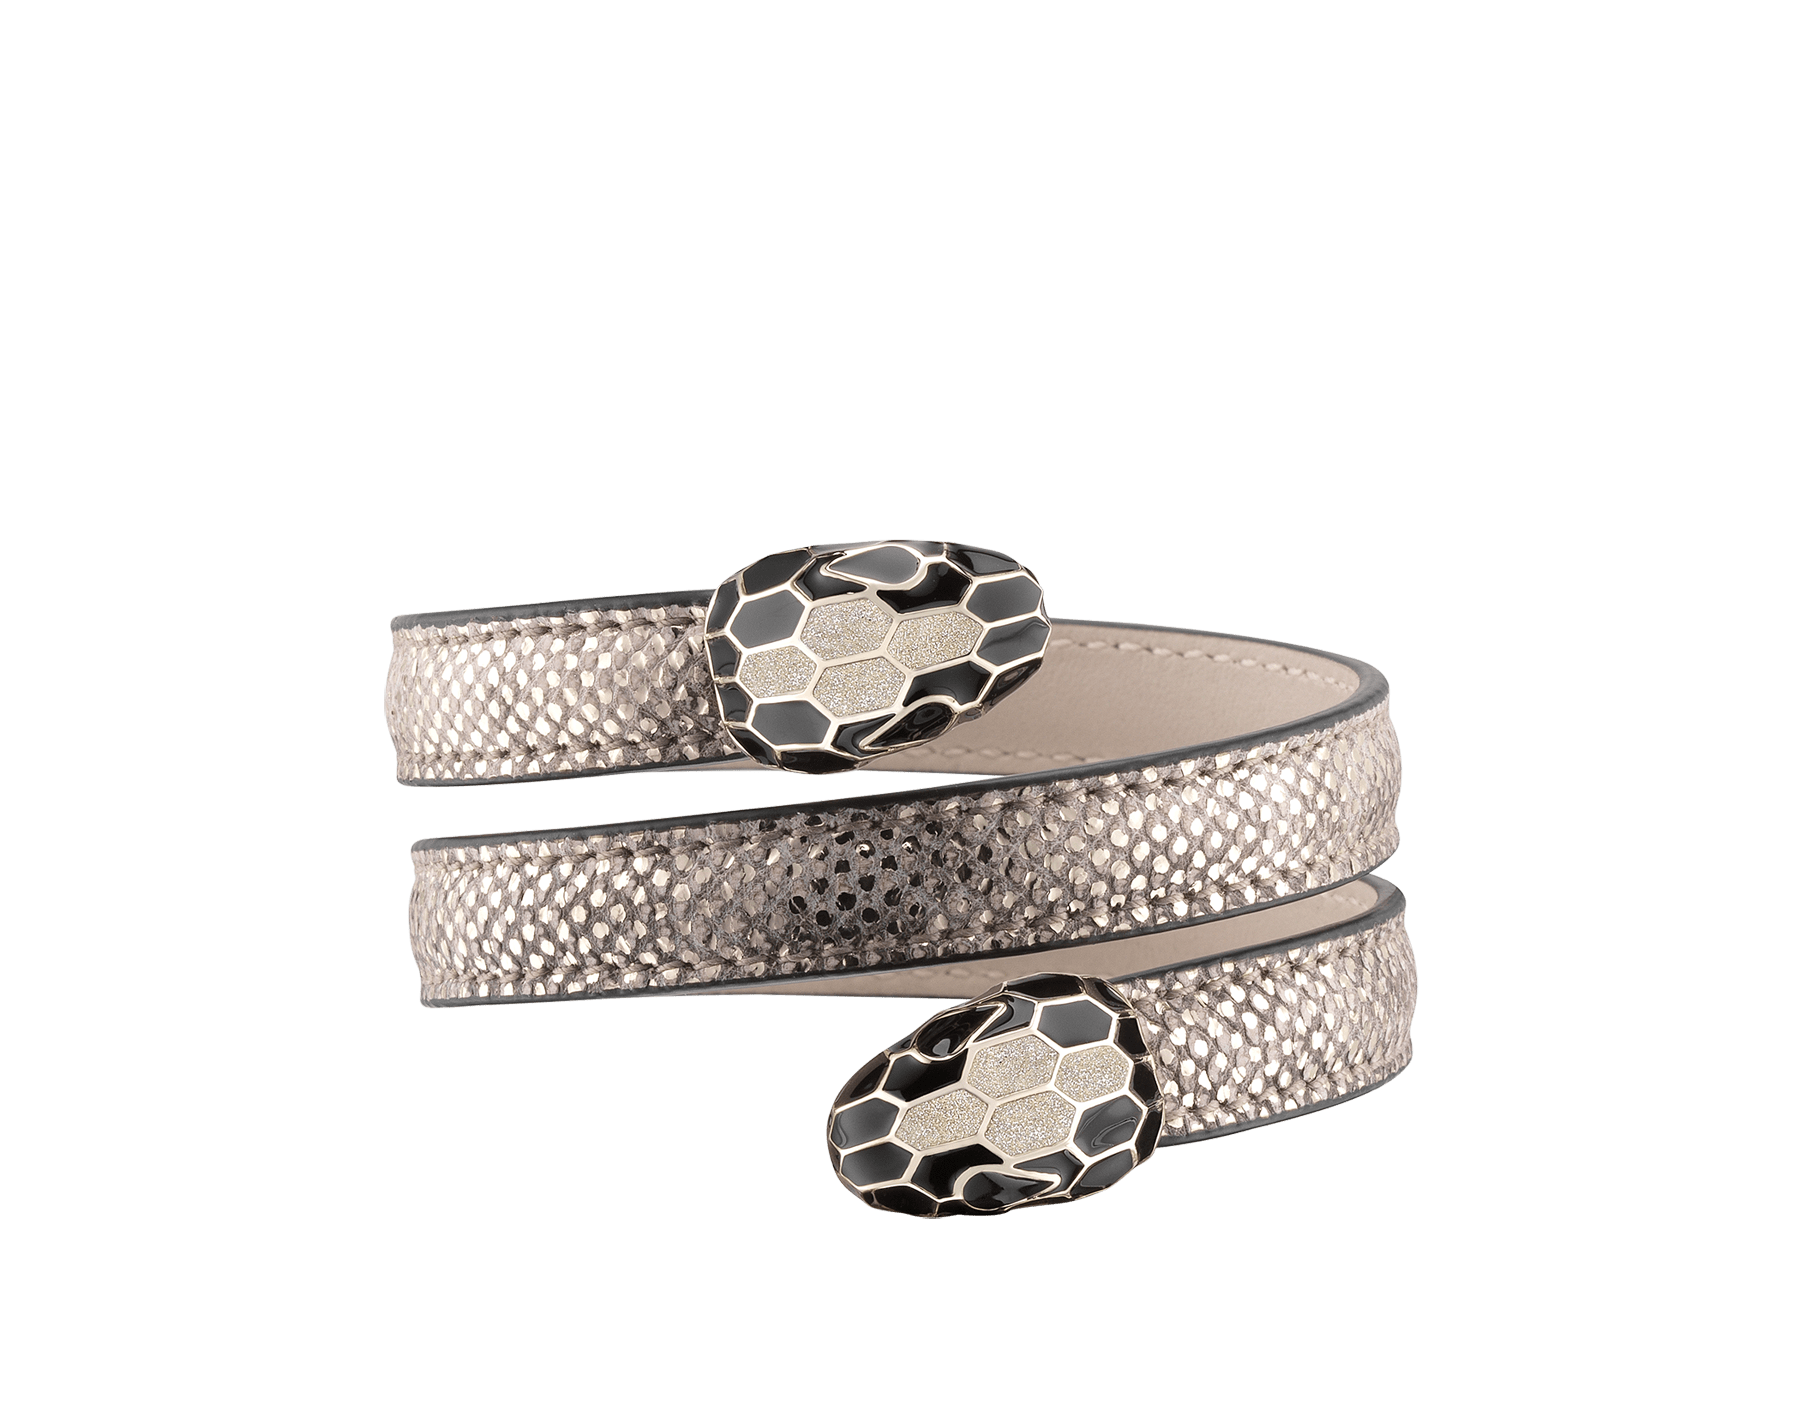 Serpenti Forever multi-coiled rigid Cleopatra bracelet in milky opal metallic karung skin, with brass light gold plated hardware. Iconic double snakehead décor in black and glitter milky opal enamel, with black enamel eyes. Cleopatra-MK-MO image 1